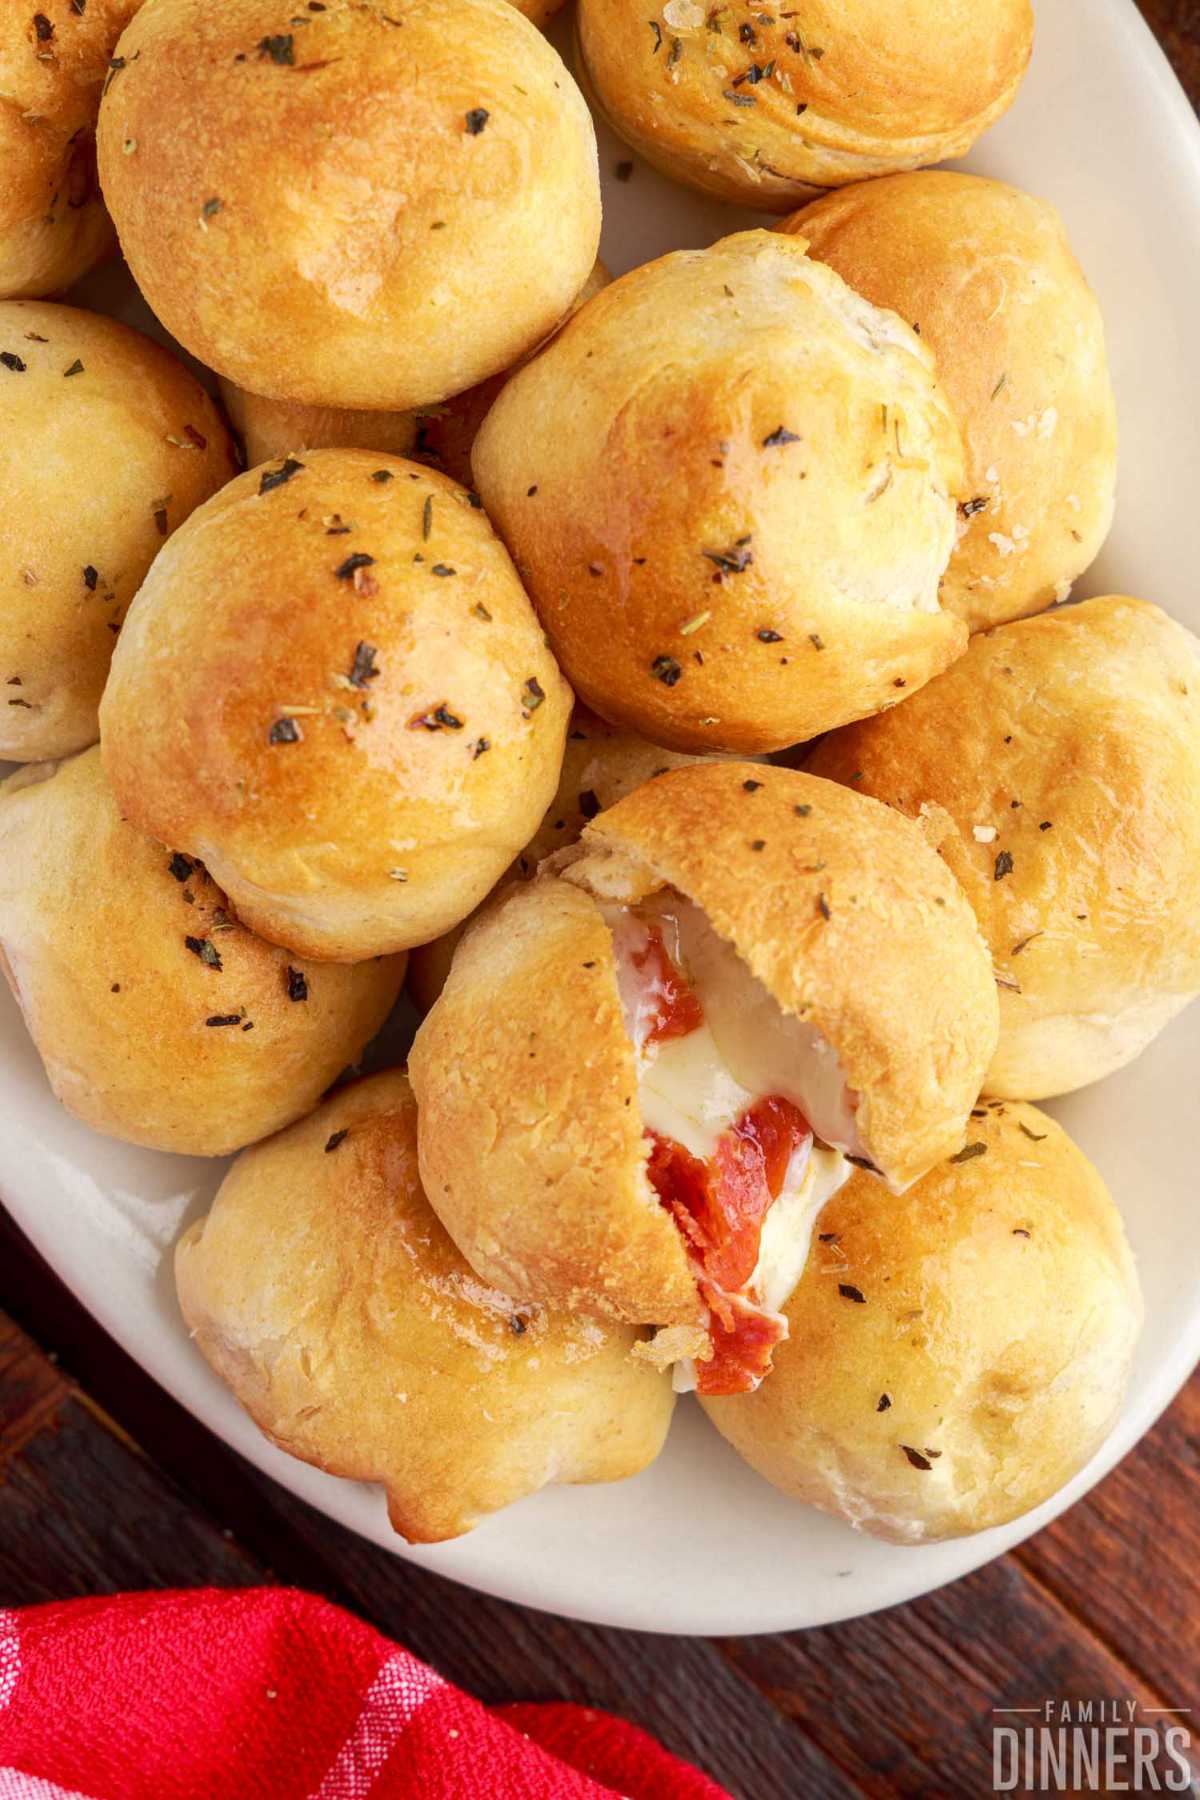 Platter full of pepperoni pizza bites made out of Pillsbury biscuit dough, mozzarella cheese and pepperoni.